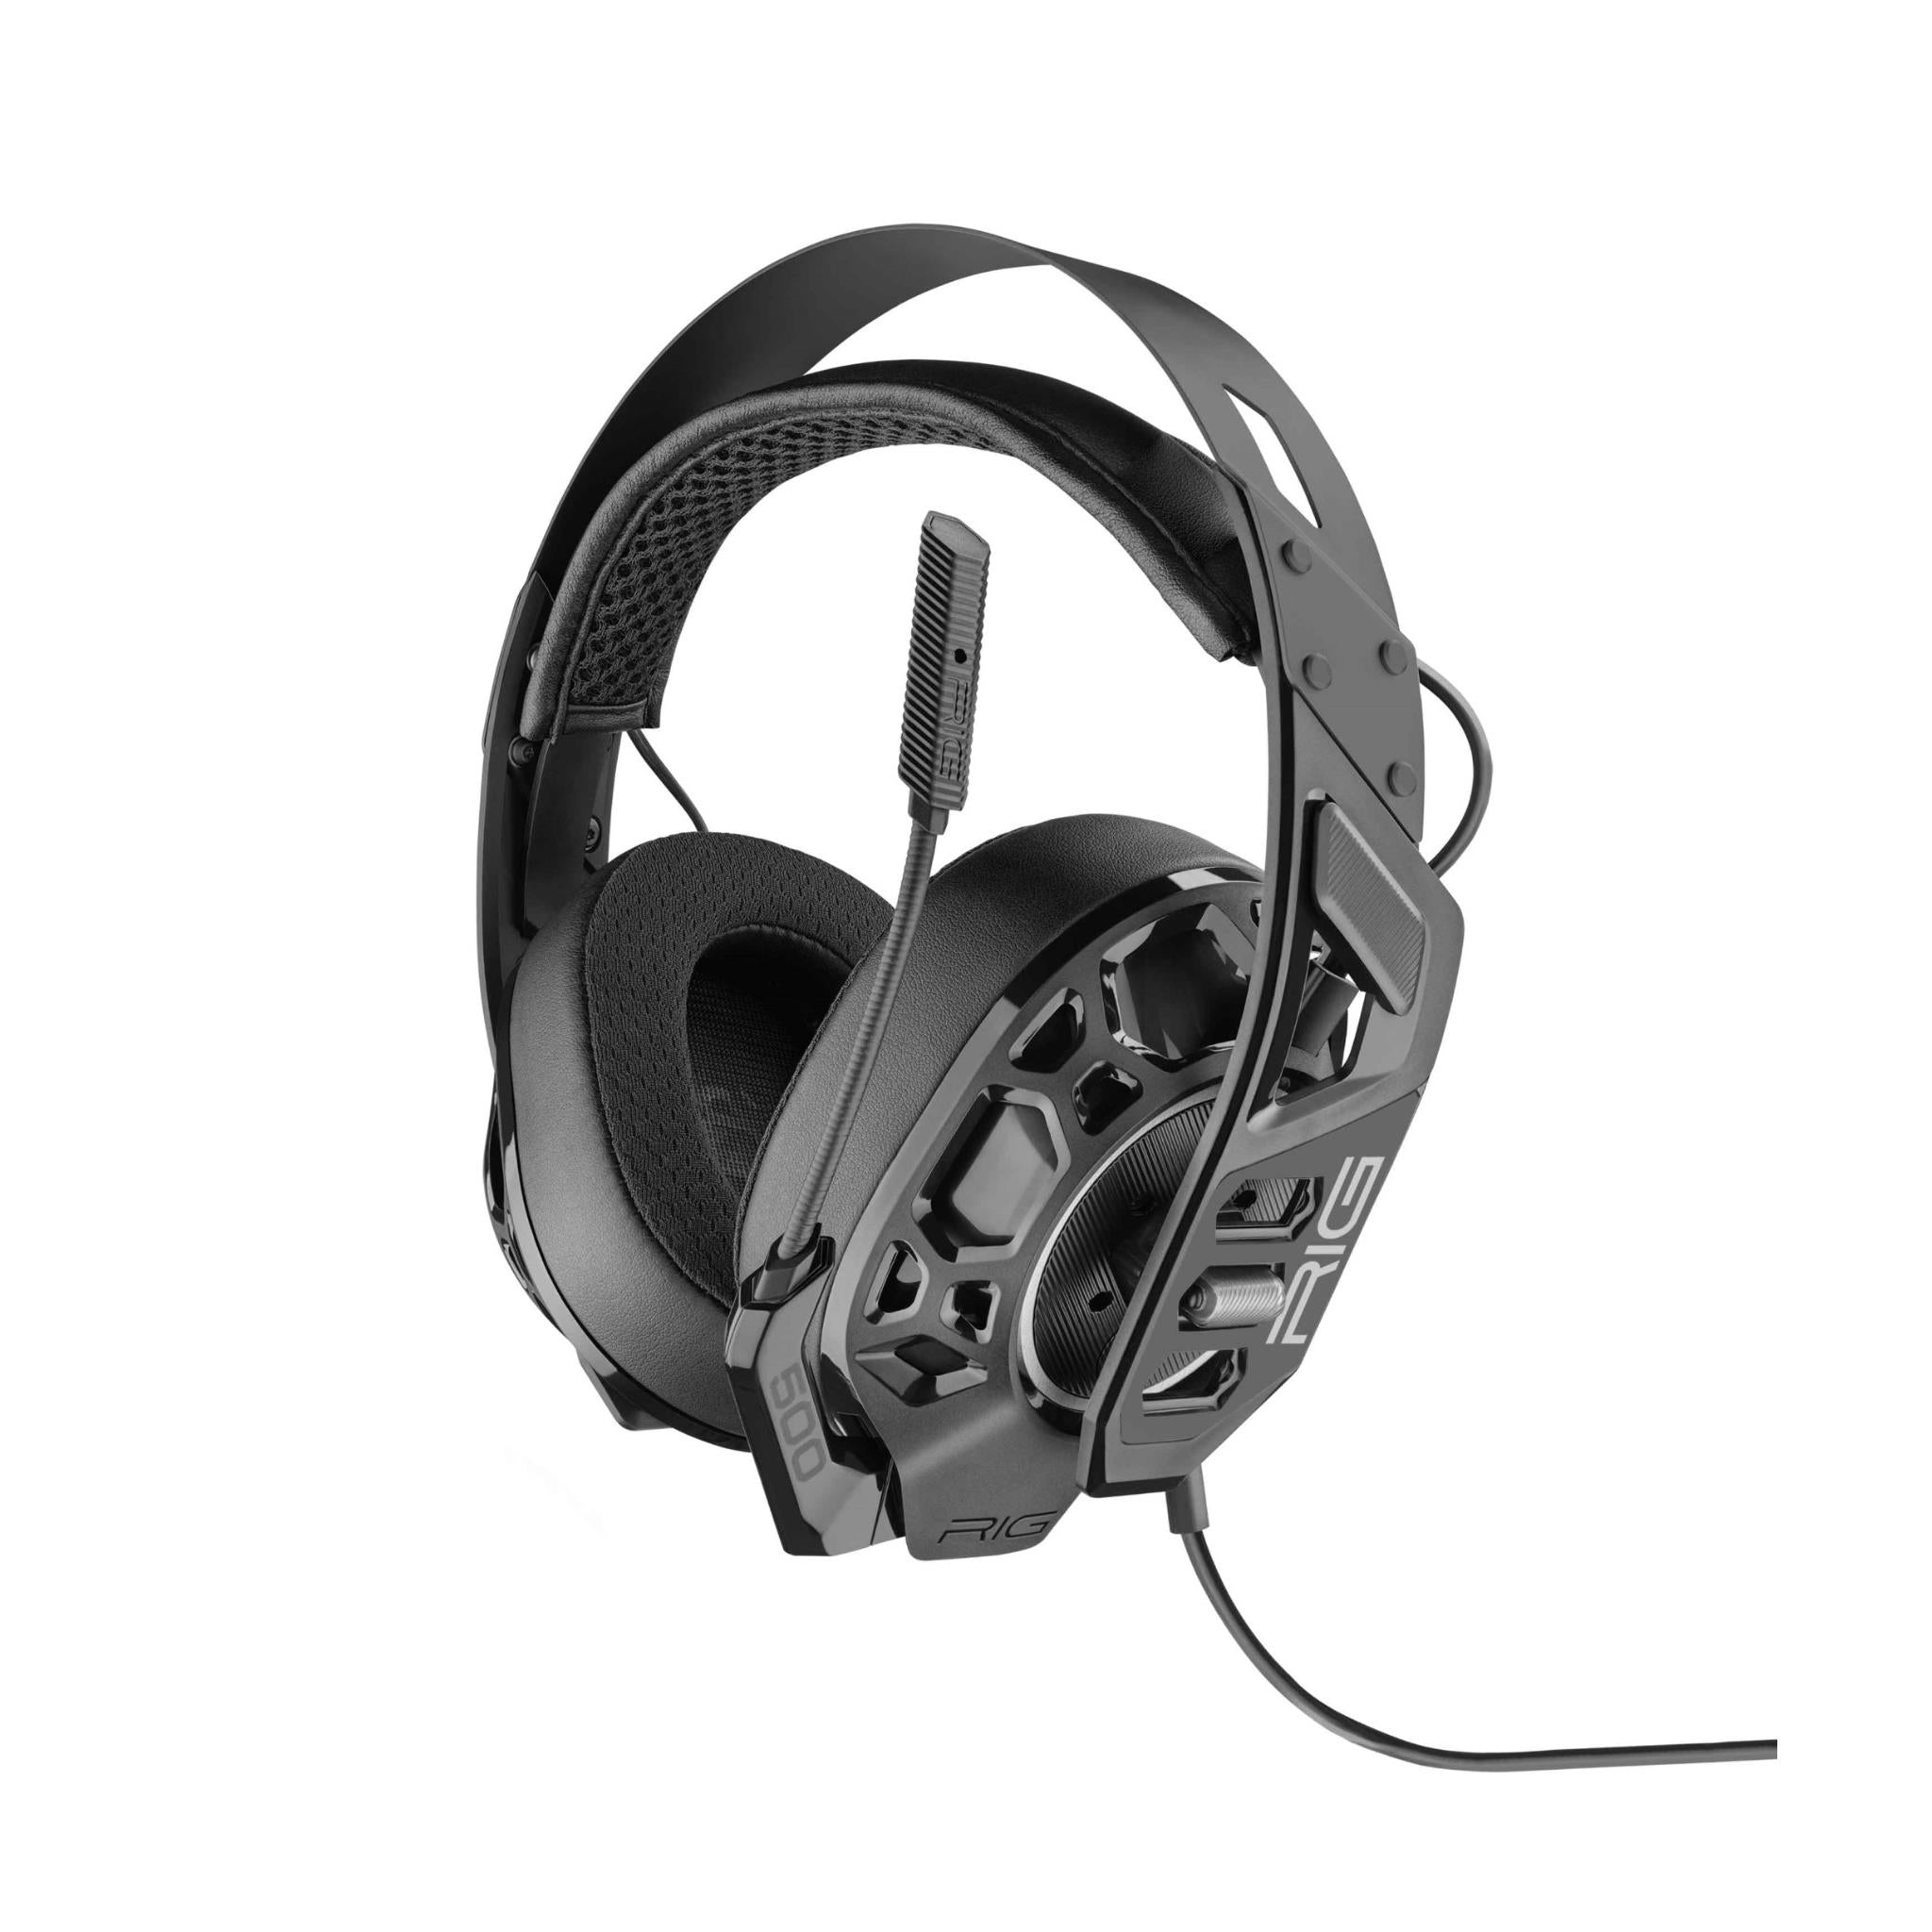 rig 500 pro hs gaming headset for playstation